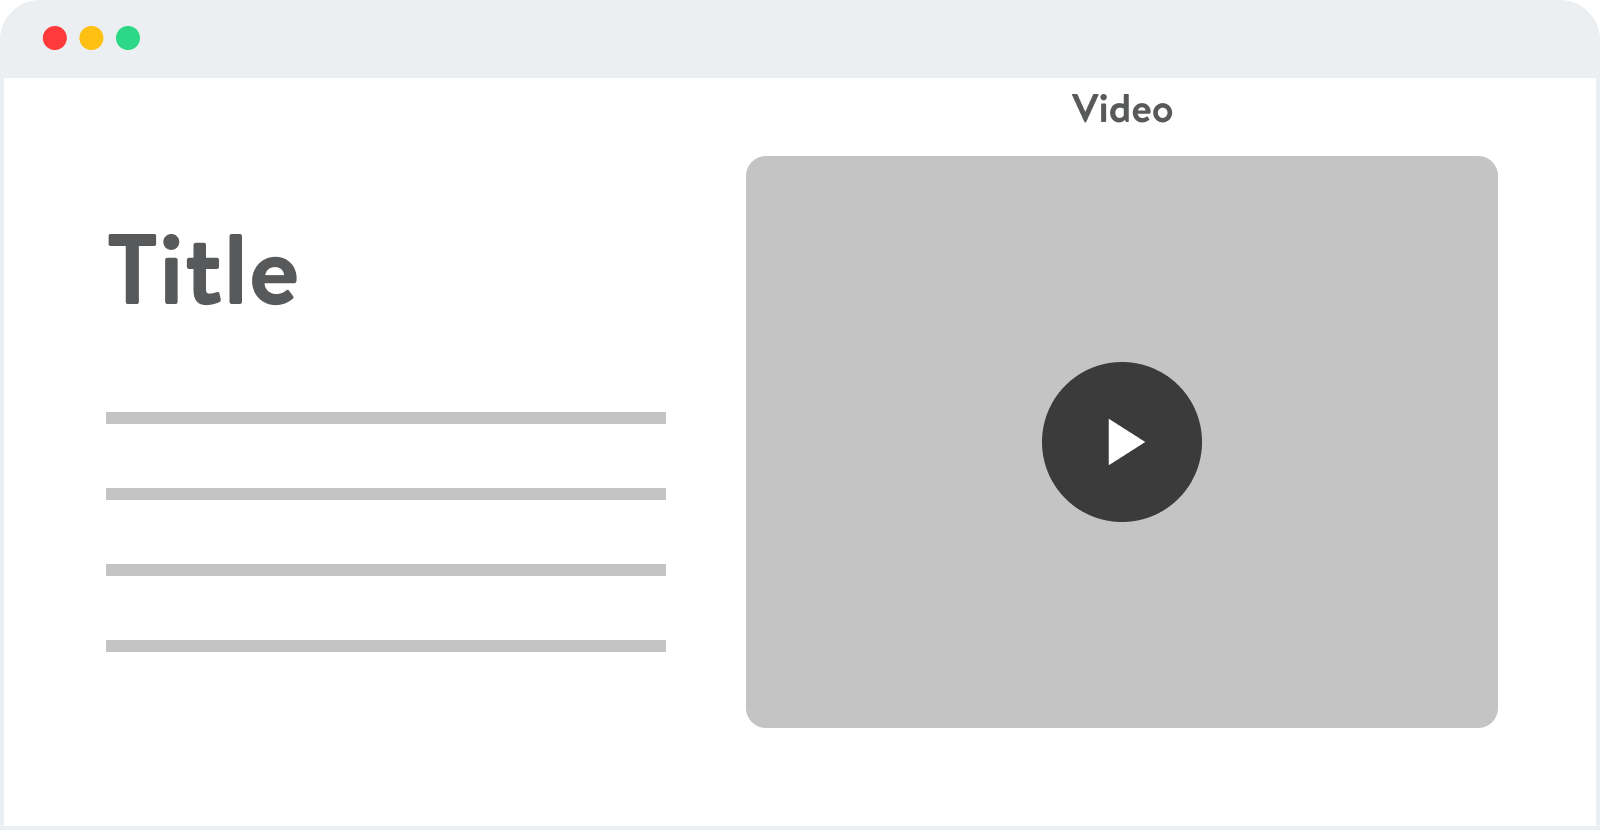 With teachable, you cant have a text box next to a video